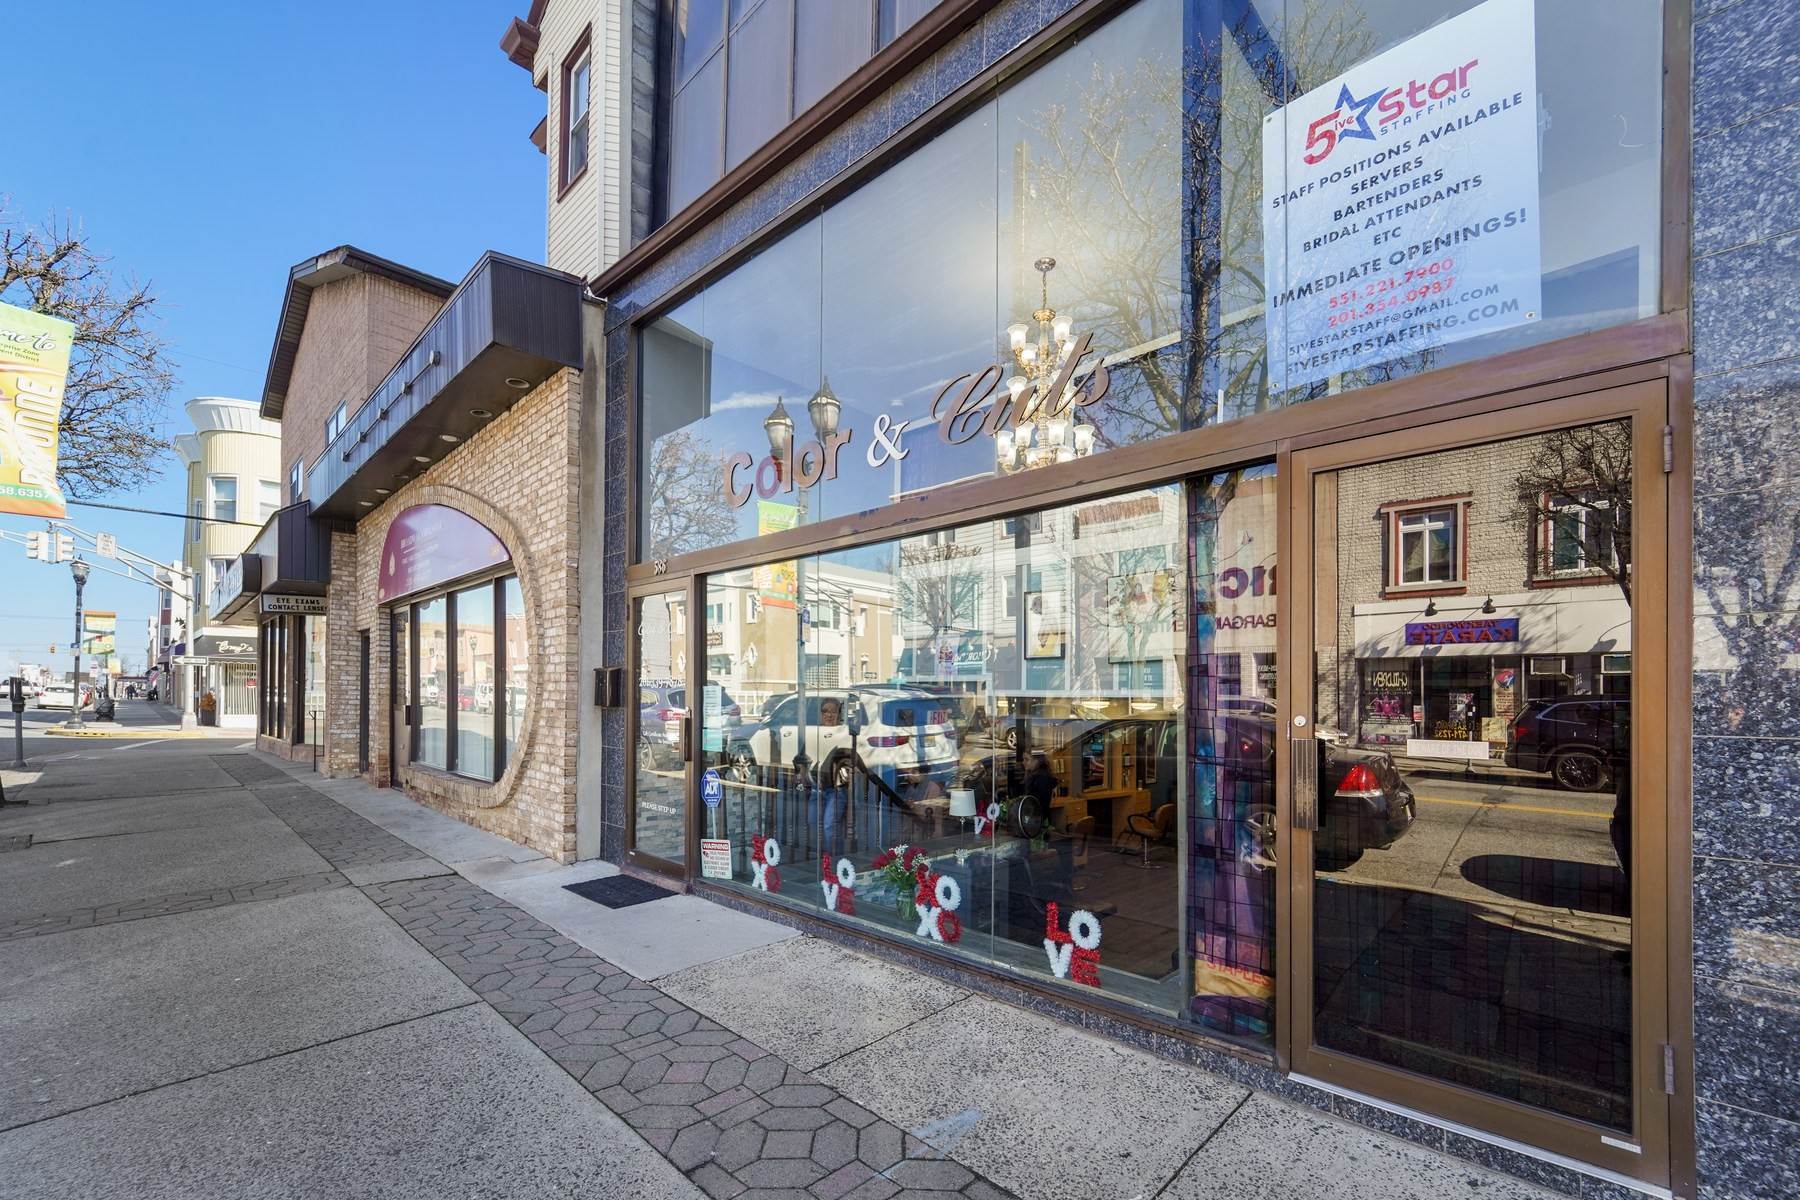 Property for Sale at Welcome to this fabulous Glass front building located in the heart of Bayonne. 586 Broadway Bayonne, New Jersey 07002 United States